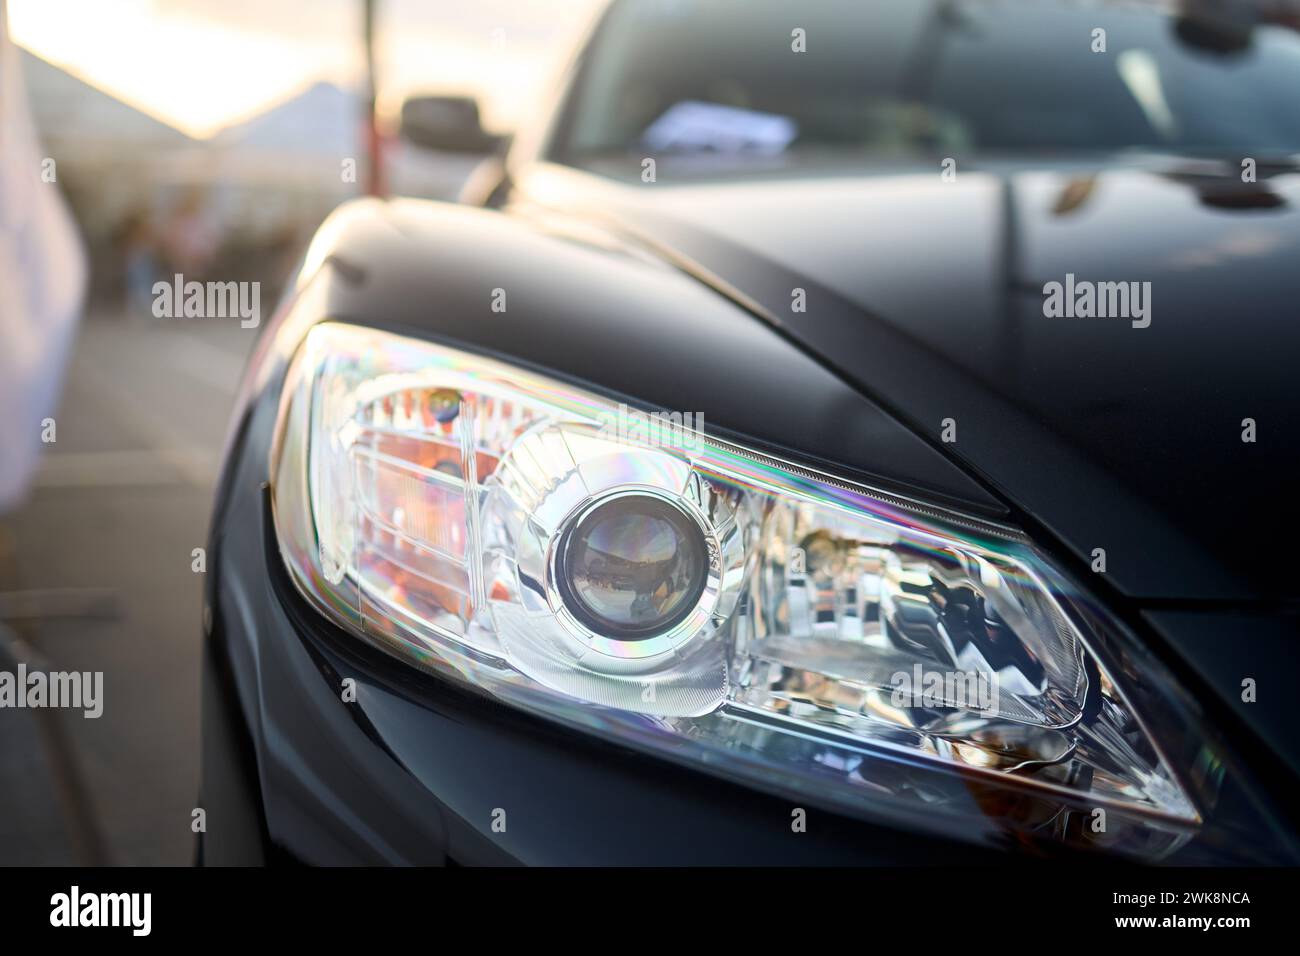 Berlin, Germany - August 20, 2022: Car Detail Shot of Mazda RX-8. Headlight front of black metallic car shot closeup on out of focus background with Stock Photo